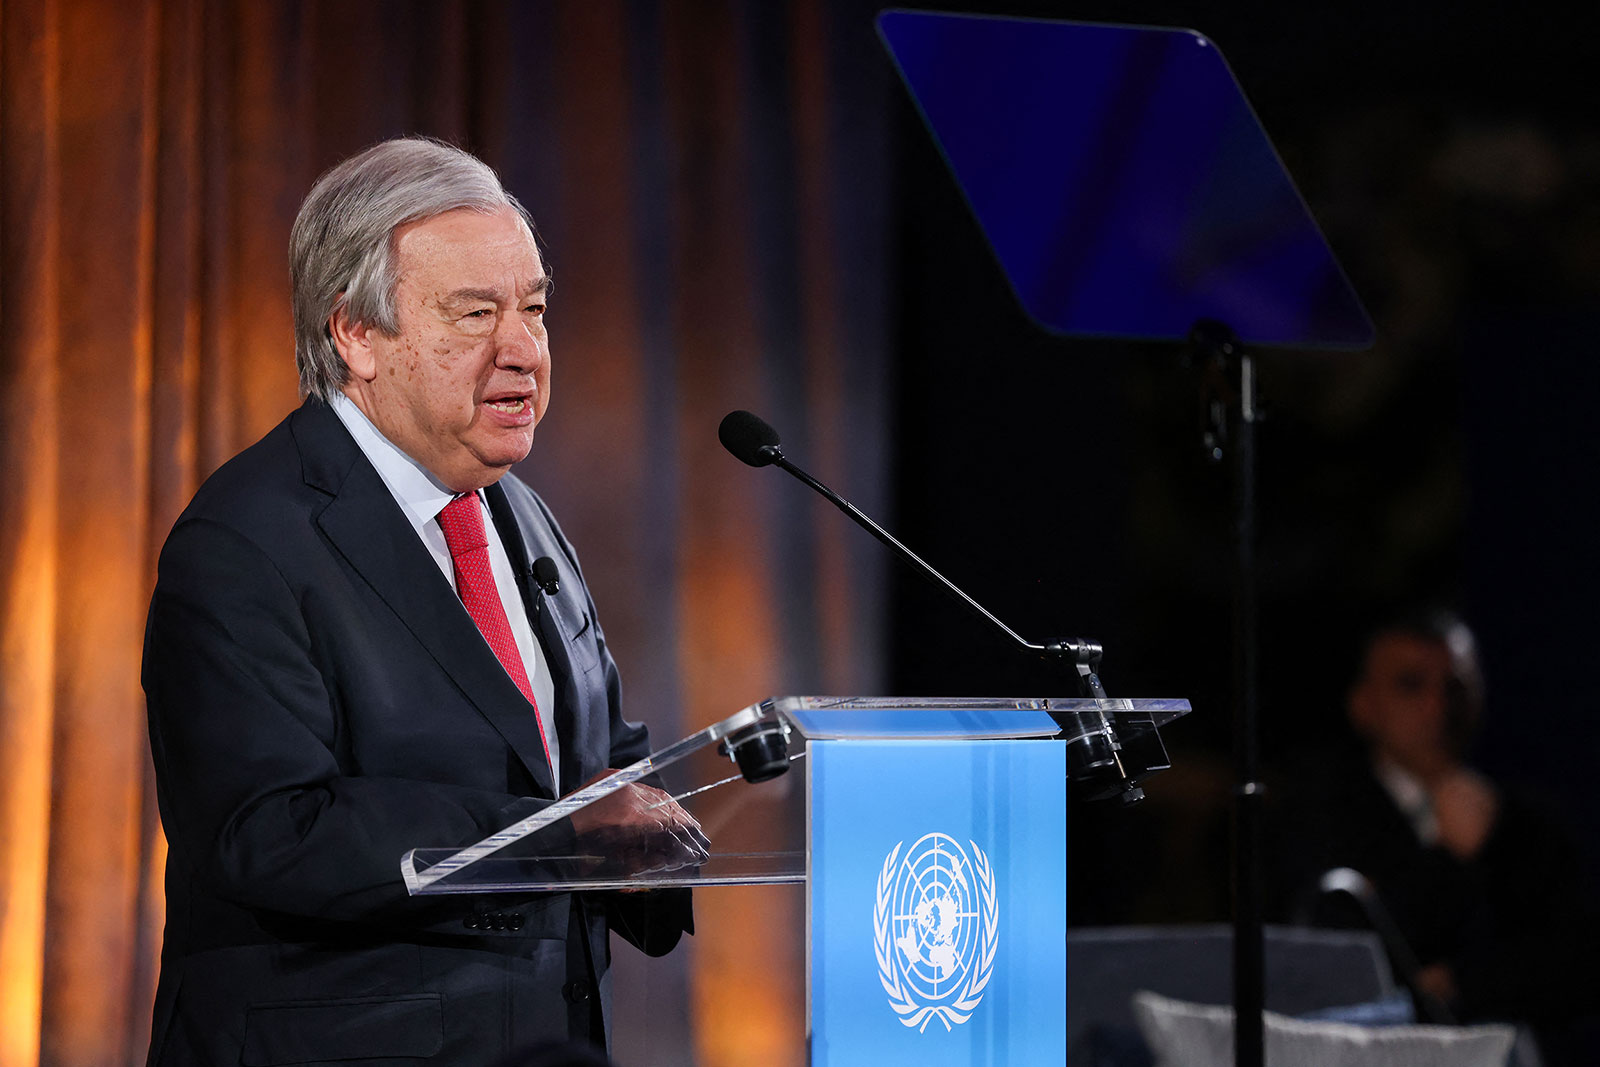 UN Secretary-General António Guterres speaks at an event in New York on June 5.